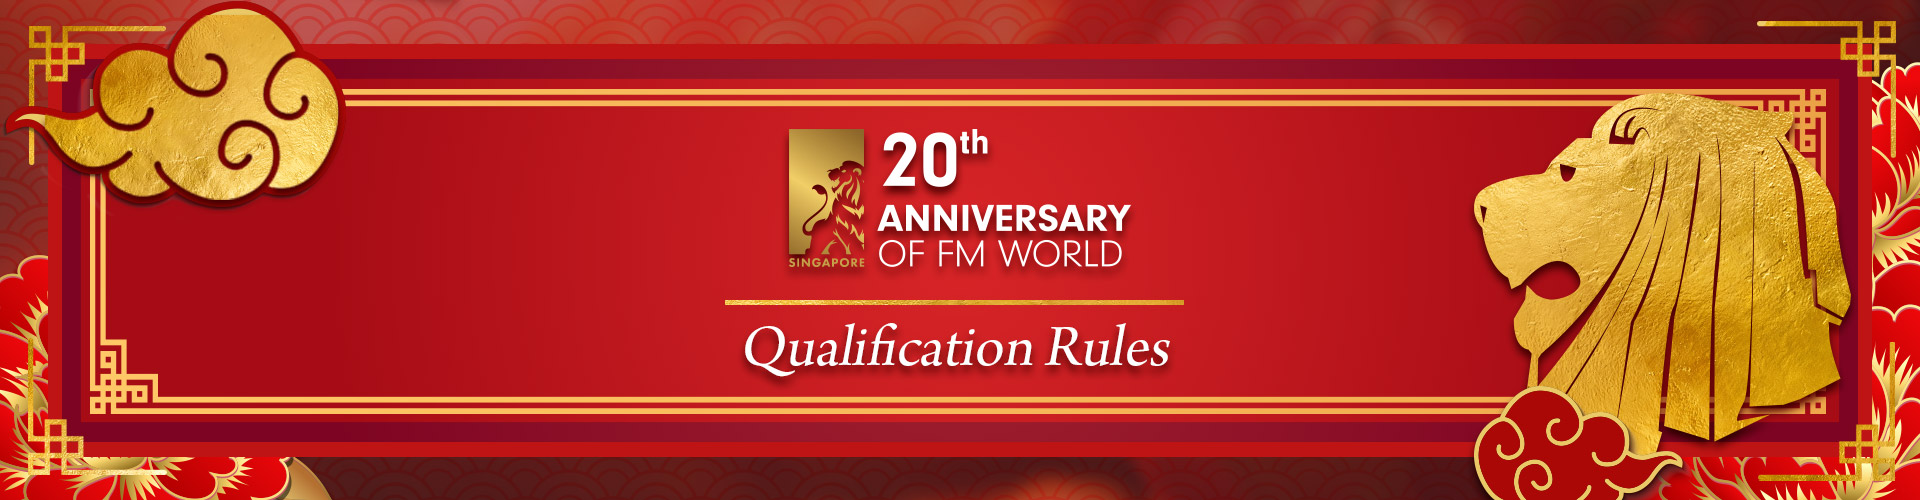 OF 20TH ANNIVERSARY - QUALIFICATION RULES